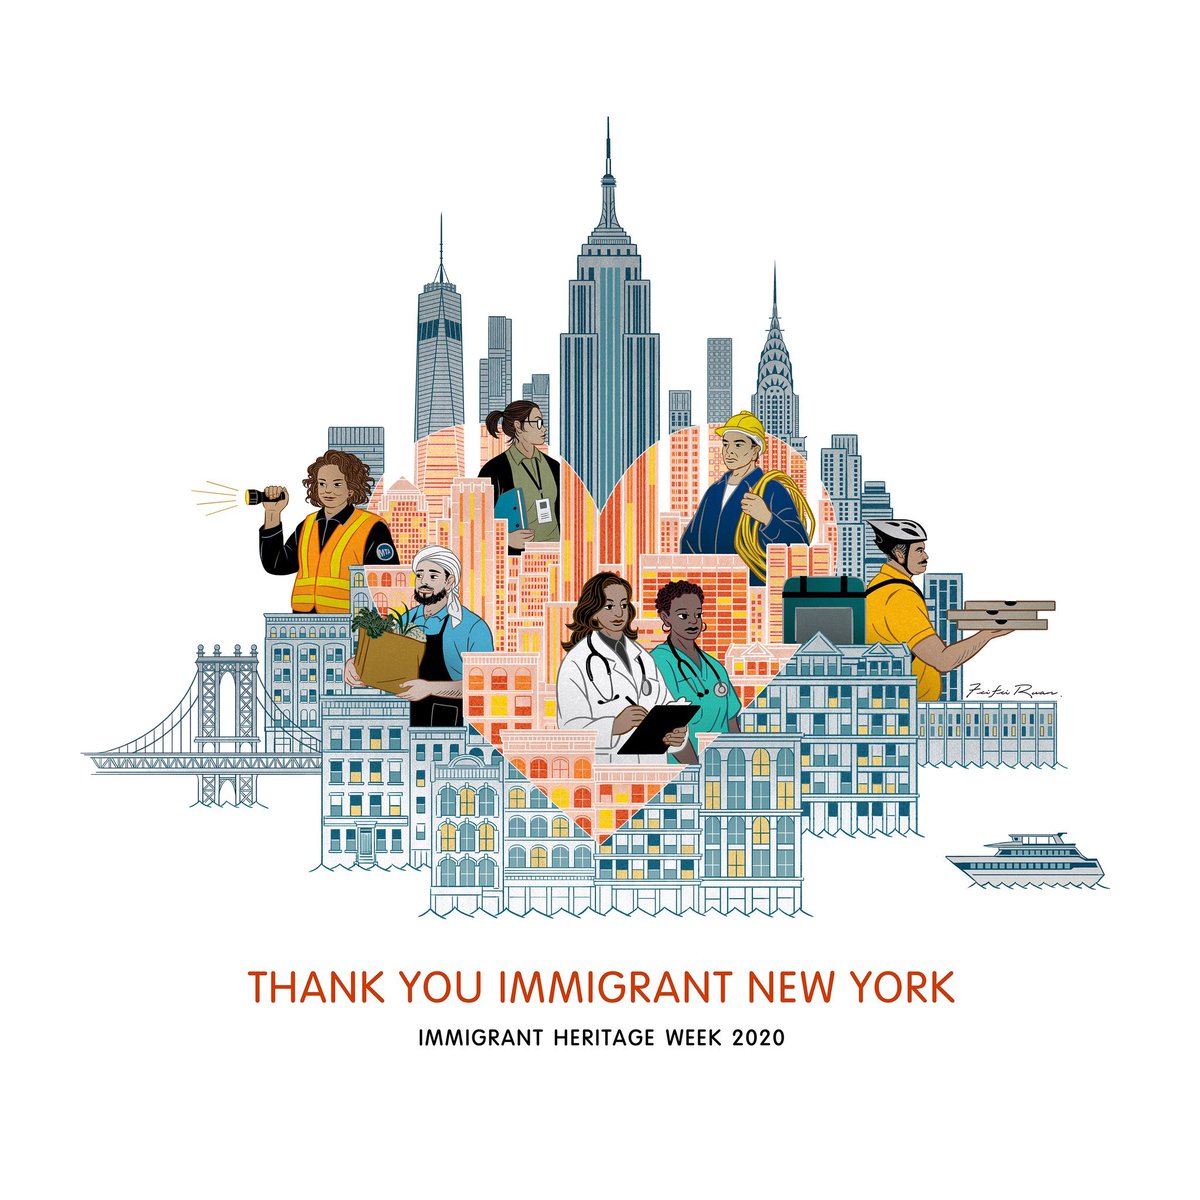 Immigrants helped build our city. They make it run every day — even during a global pandemic. Now more than ever we must celebrate the rich contributions our immigrant communities have made to New York City. #ImmigrantHeritageWeek